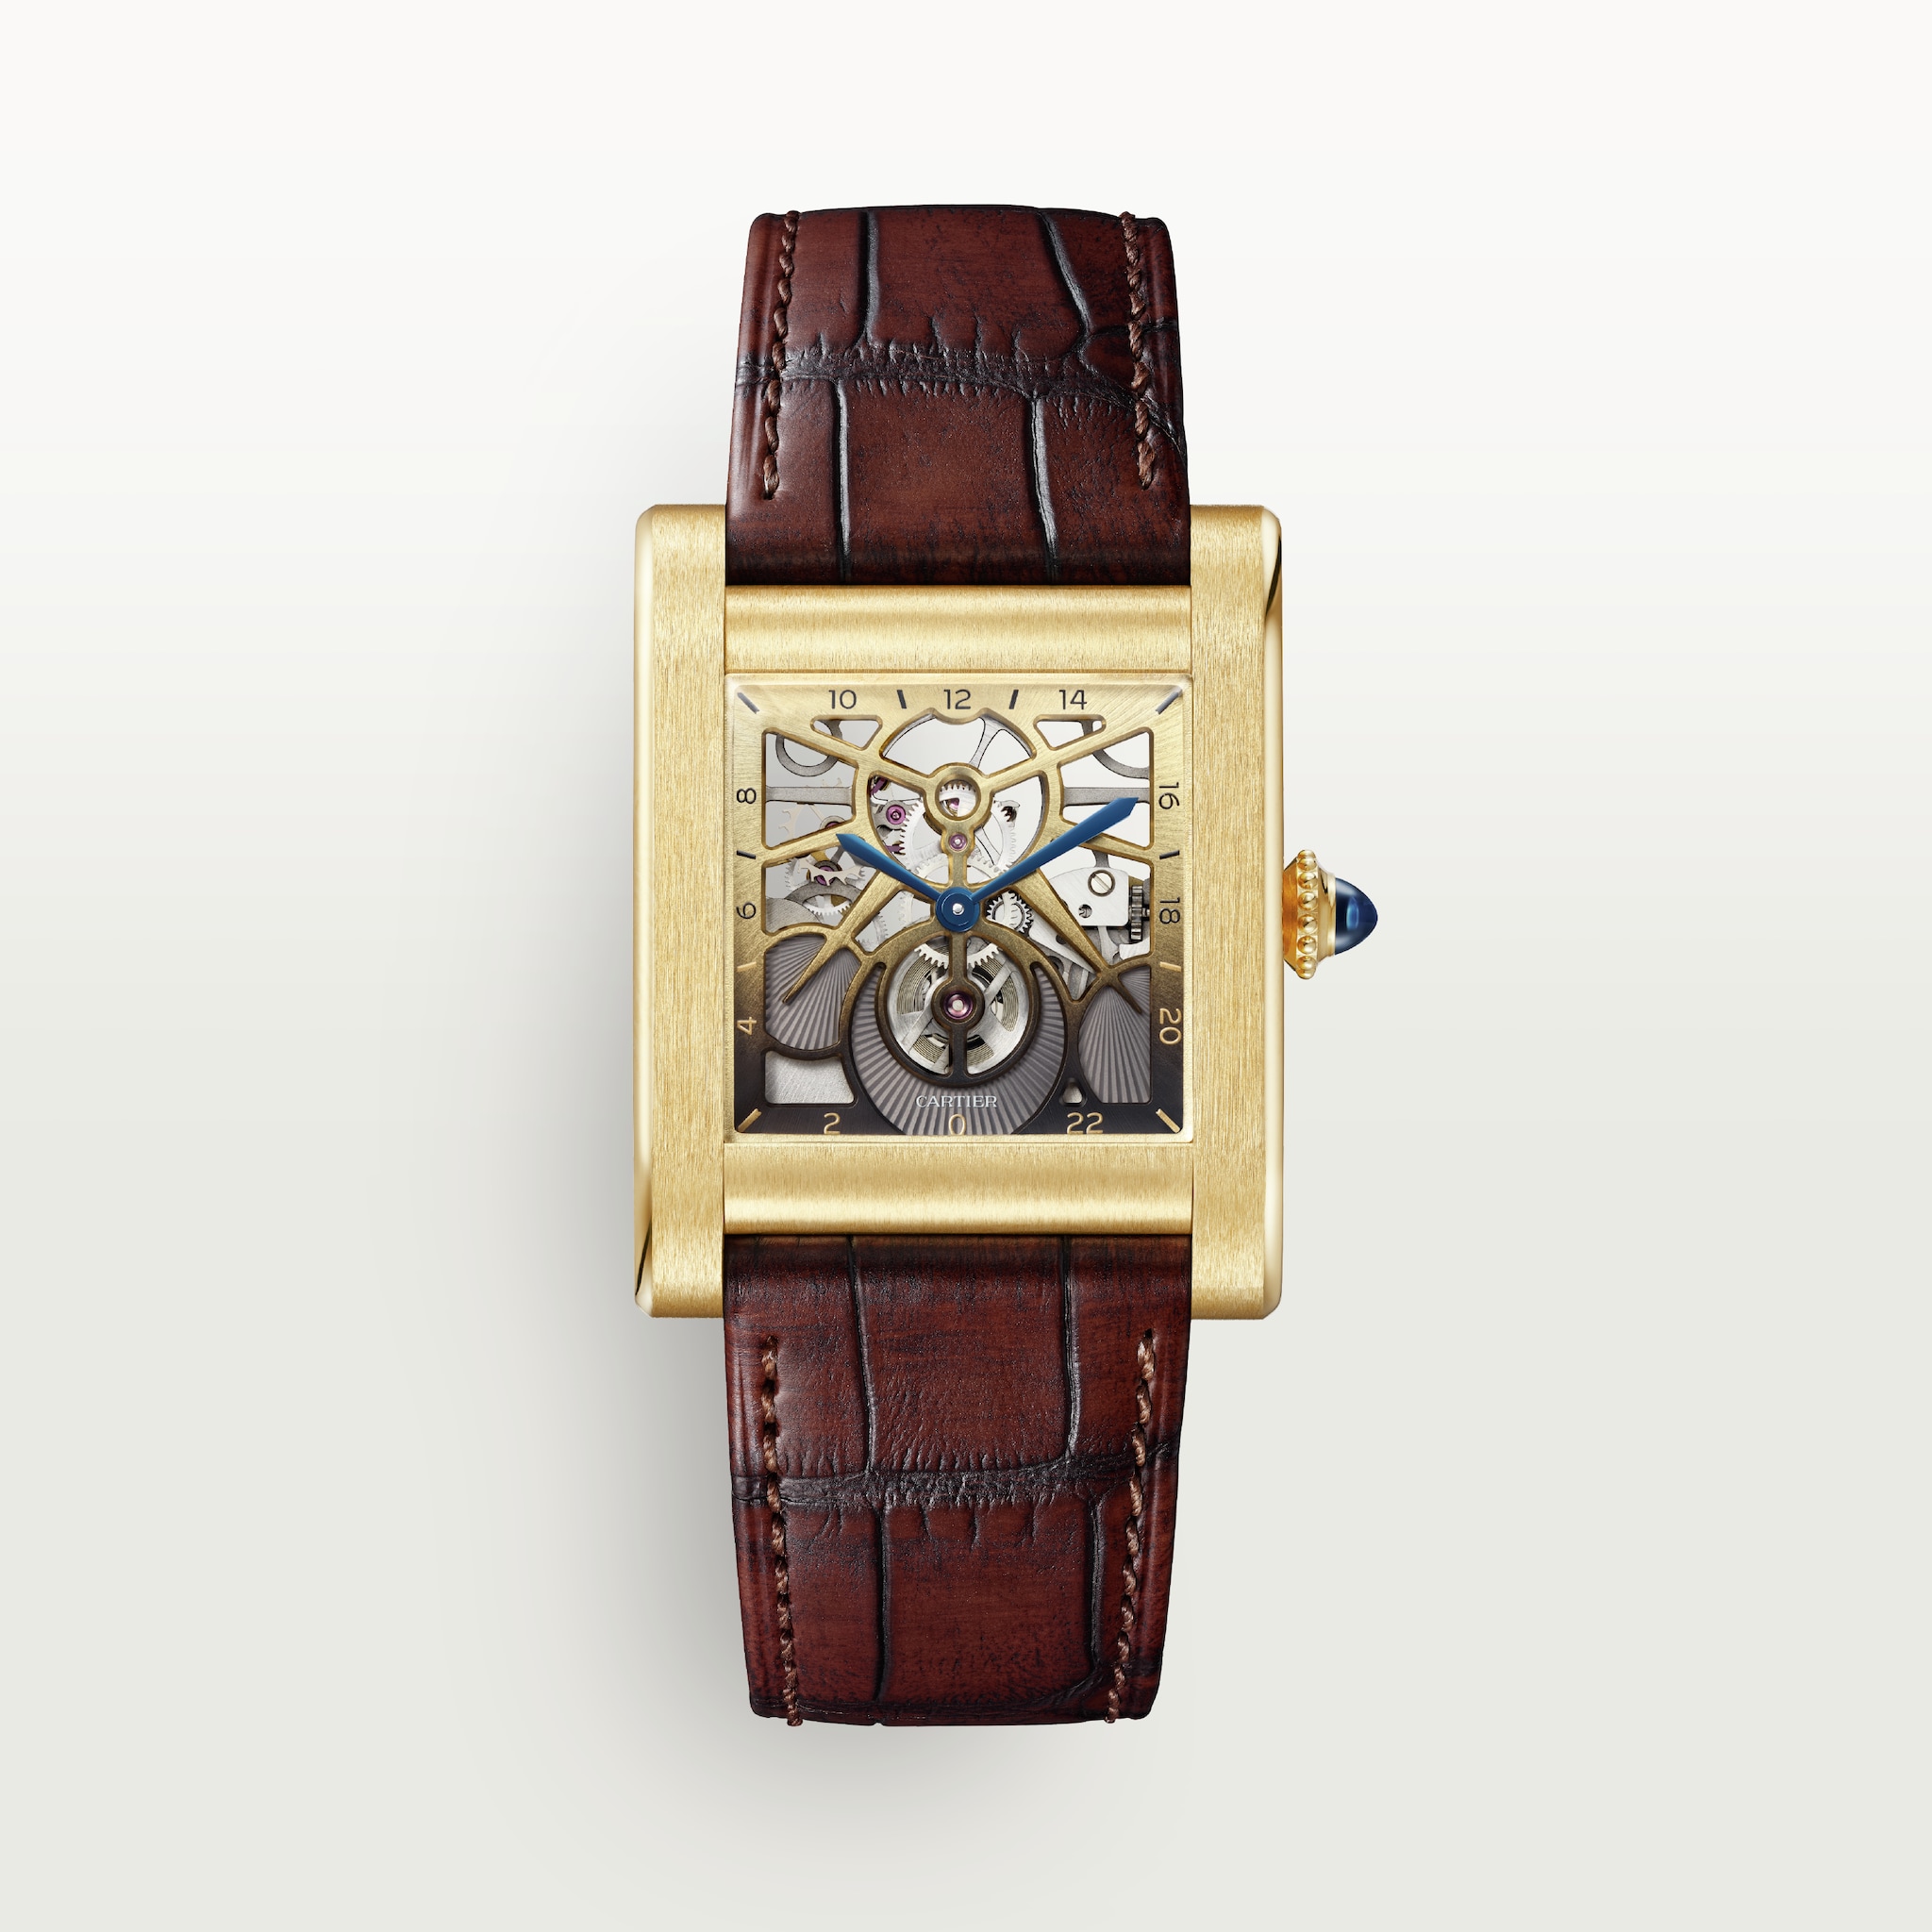 Tank Normale watchLarge model, hand-wound mechanical skeleton movement, yellow gold, leather